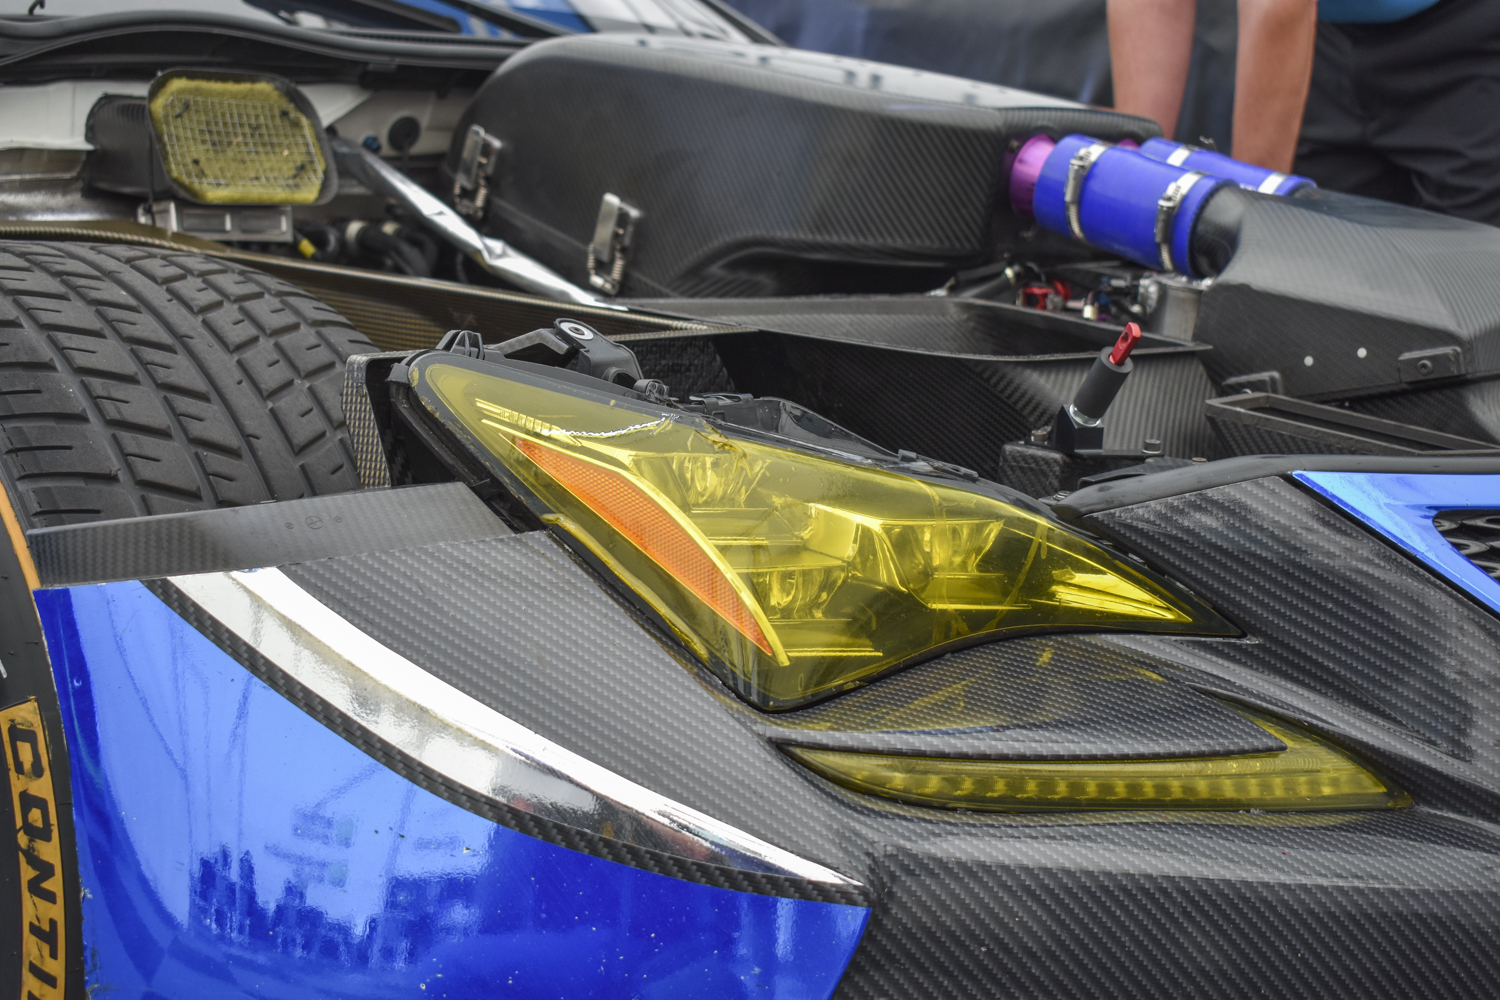 Close up detail shot of the Lexus RC F GT3 showing off the front right headlight and engine